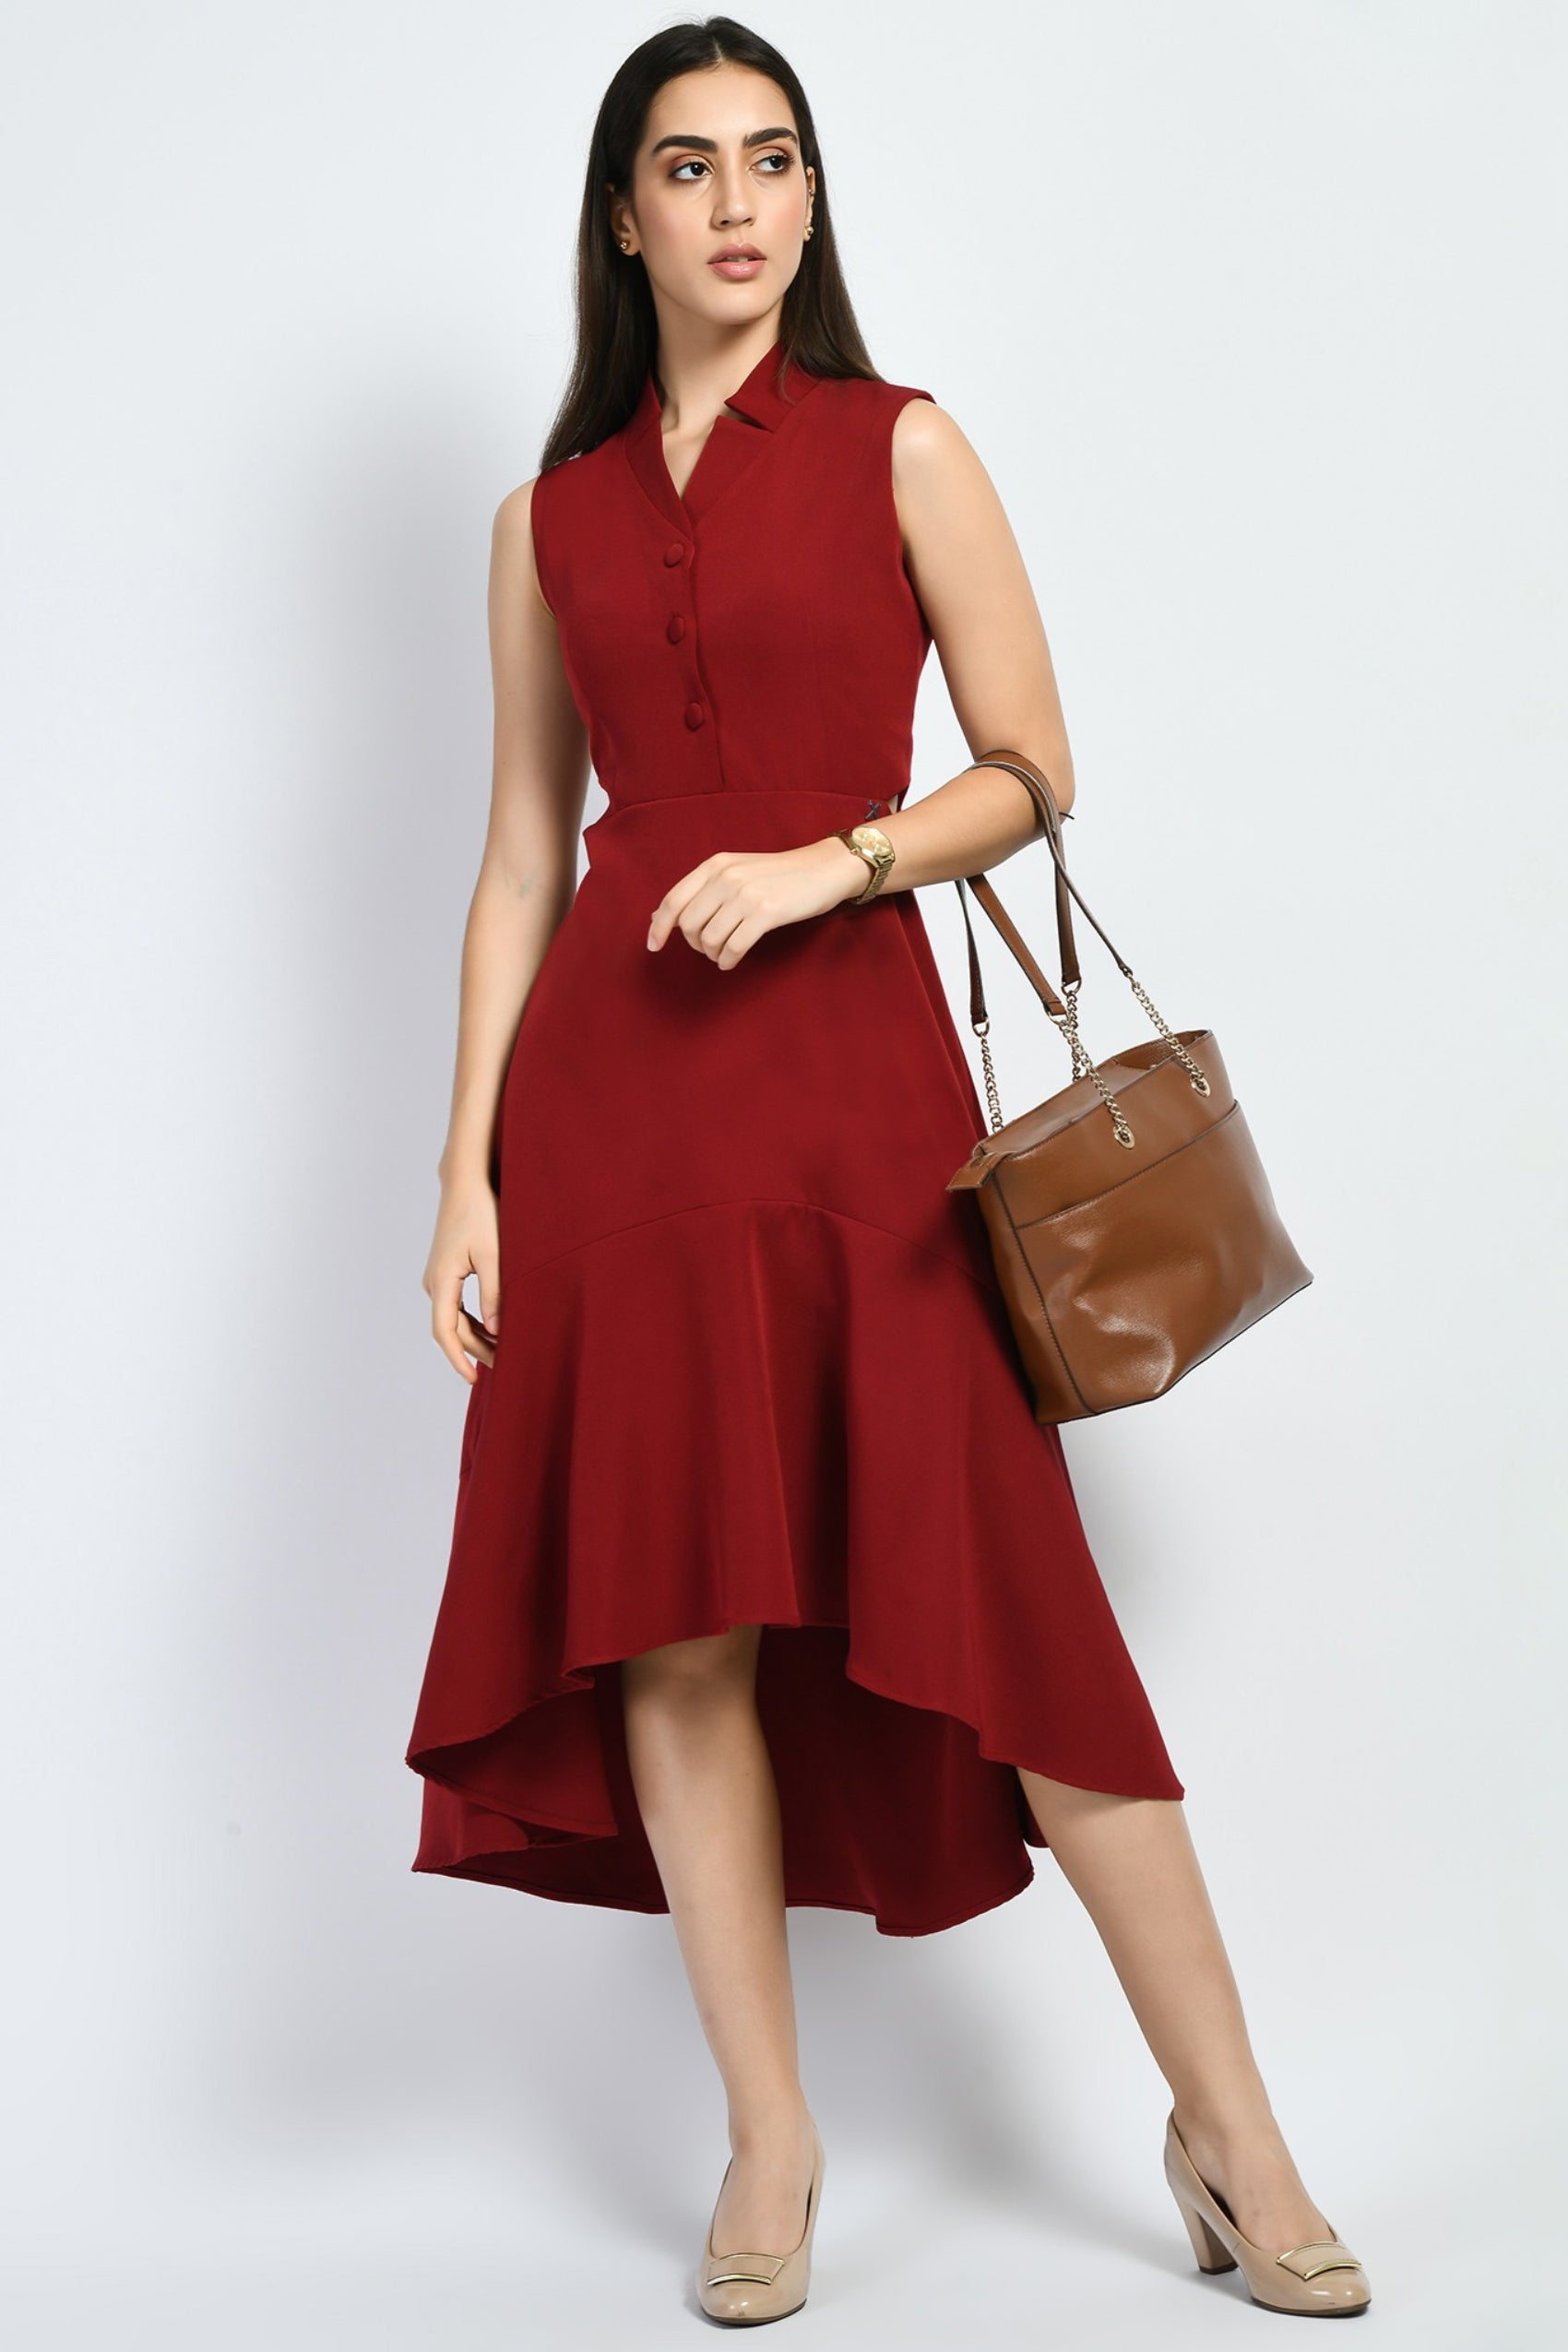 Designer Up n down Ruffle Party wear dress at Rs.700/Piece in thane offer  by I Reflect